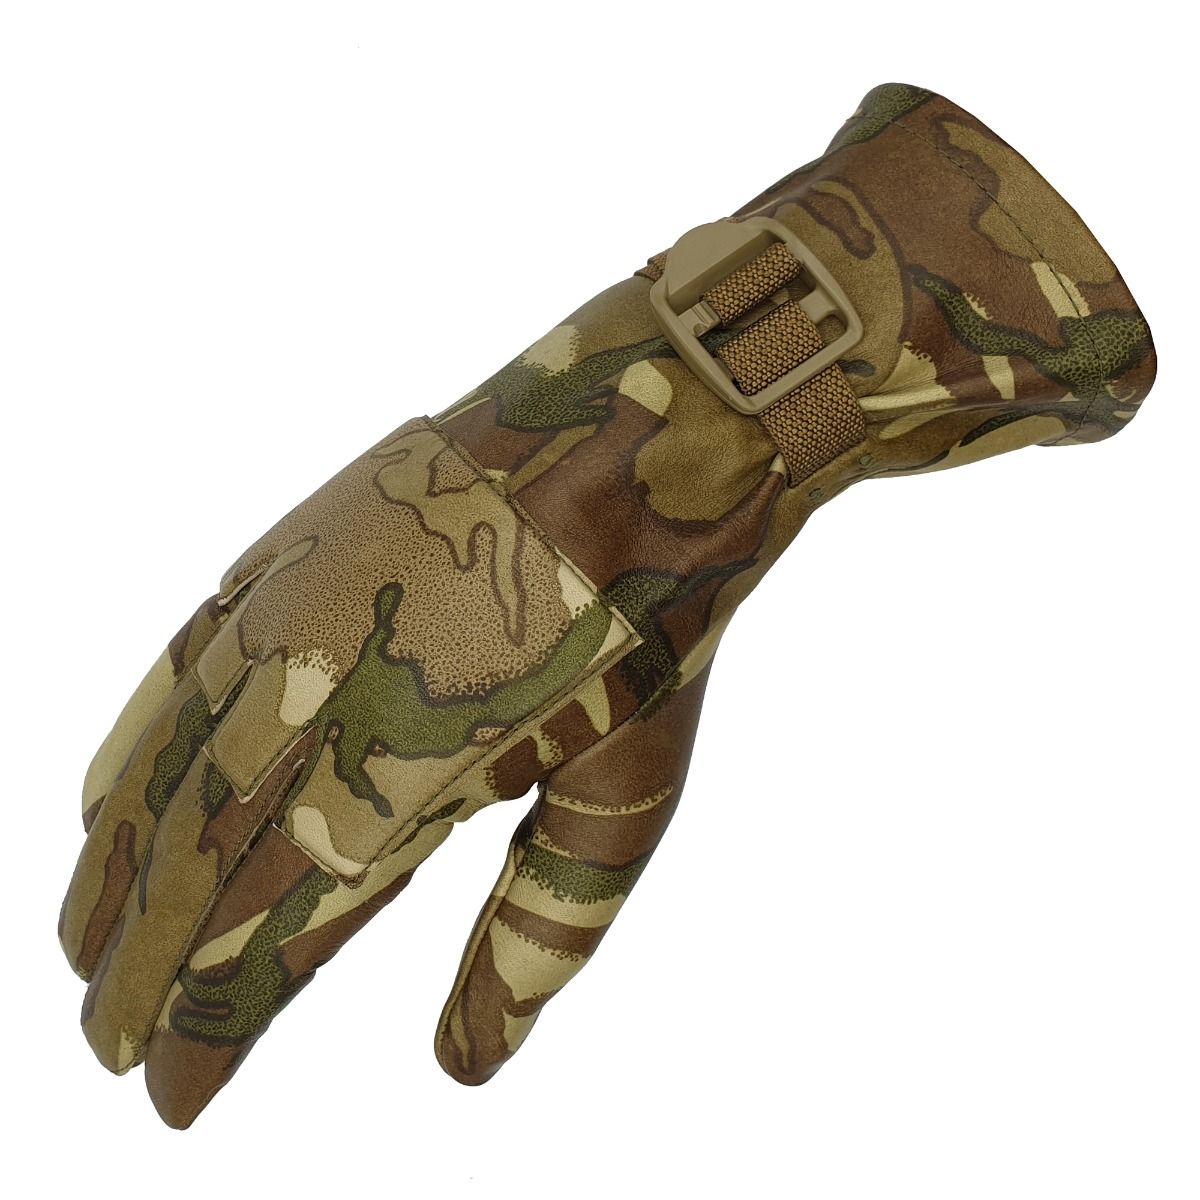 Warm Weather MTP Gloves - Military Gloves - Buy now! |